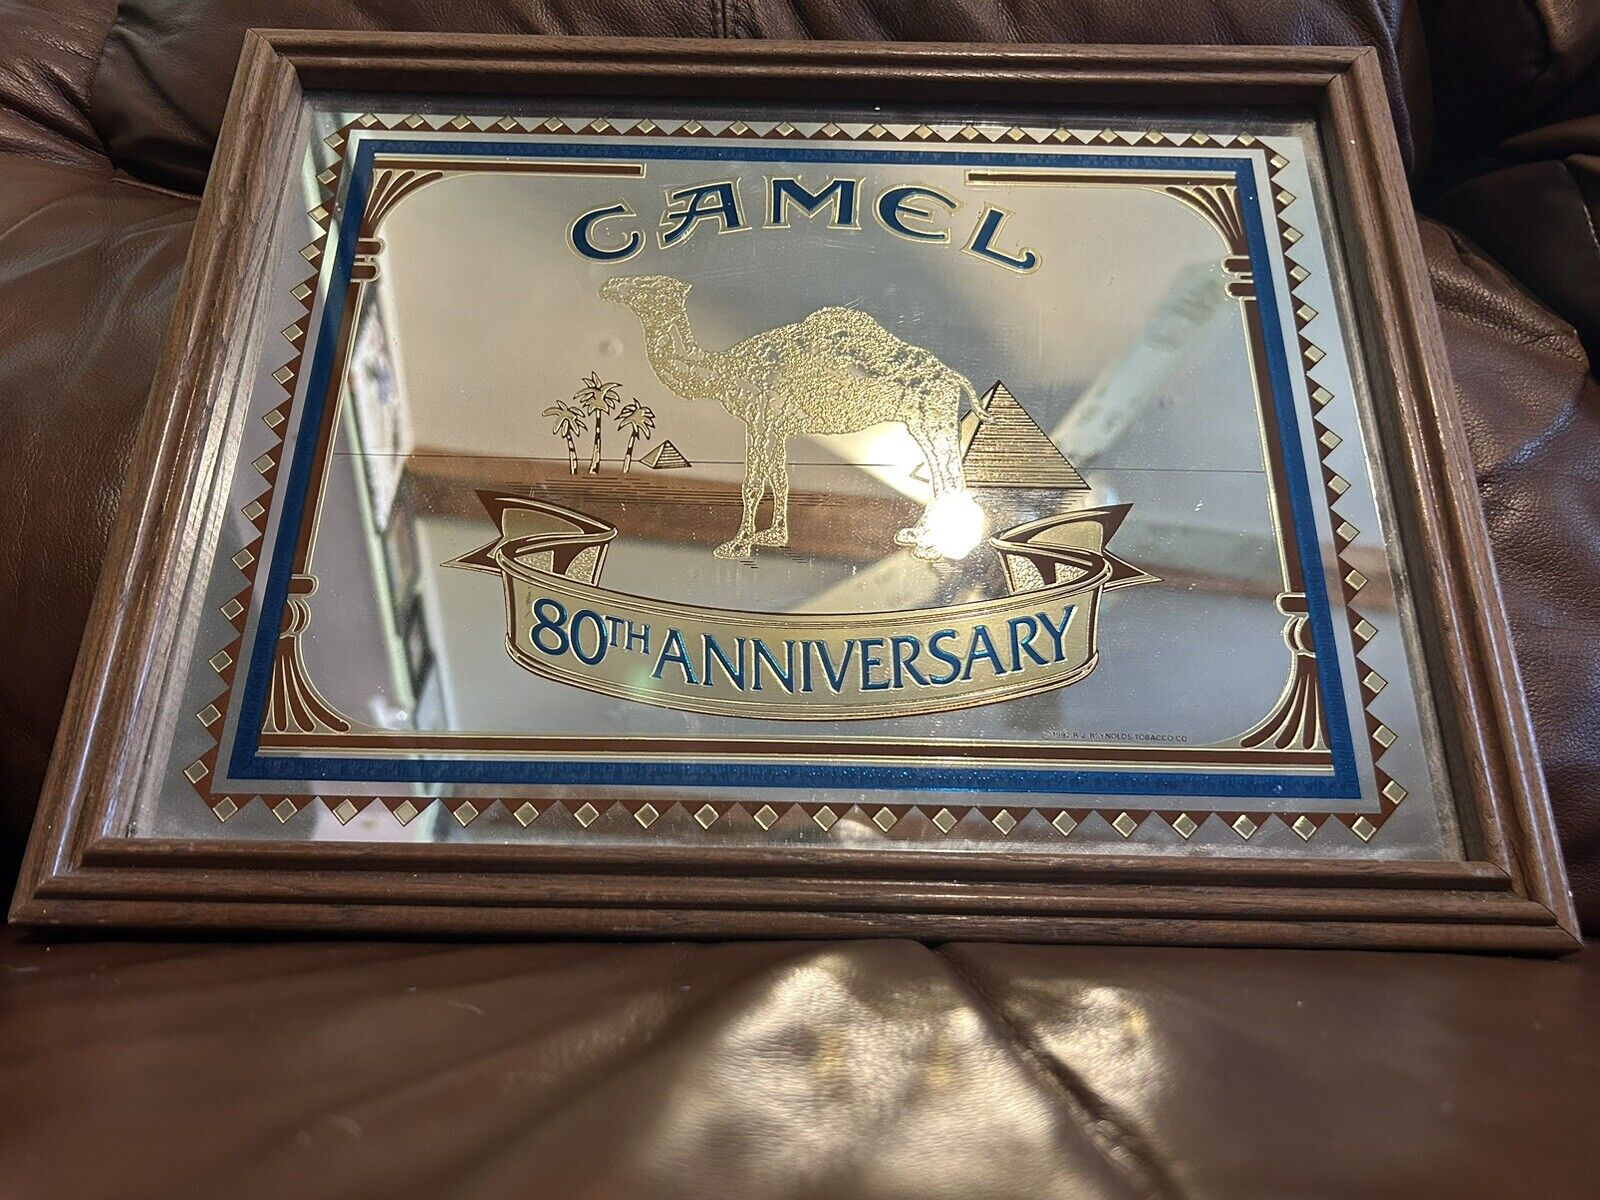 1992 CAMEL CIGARETTES 80TH ANNIVERSARY ADVERTISING  MIRROR SIGN 12